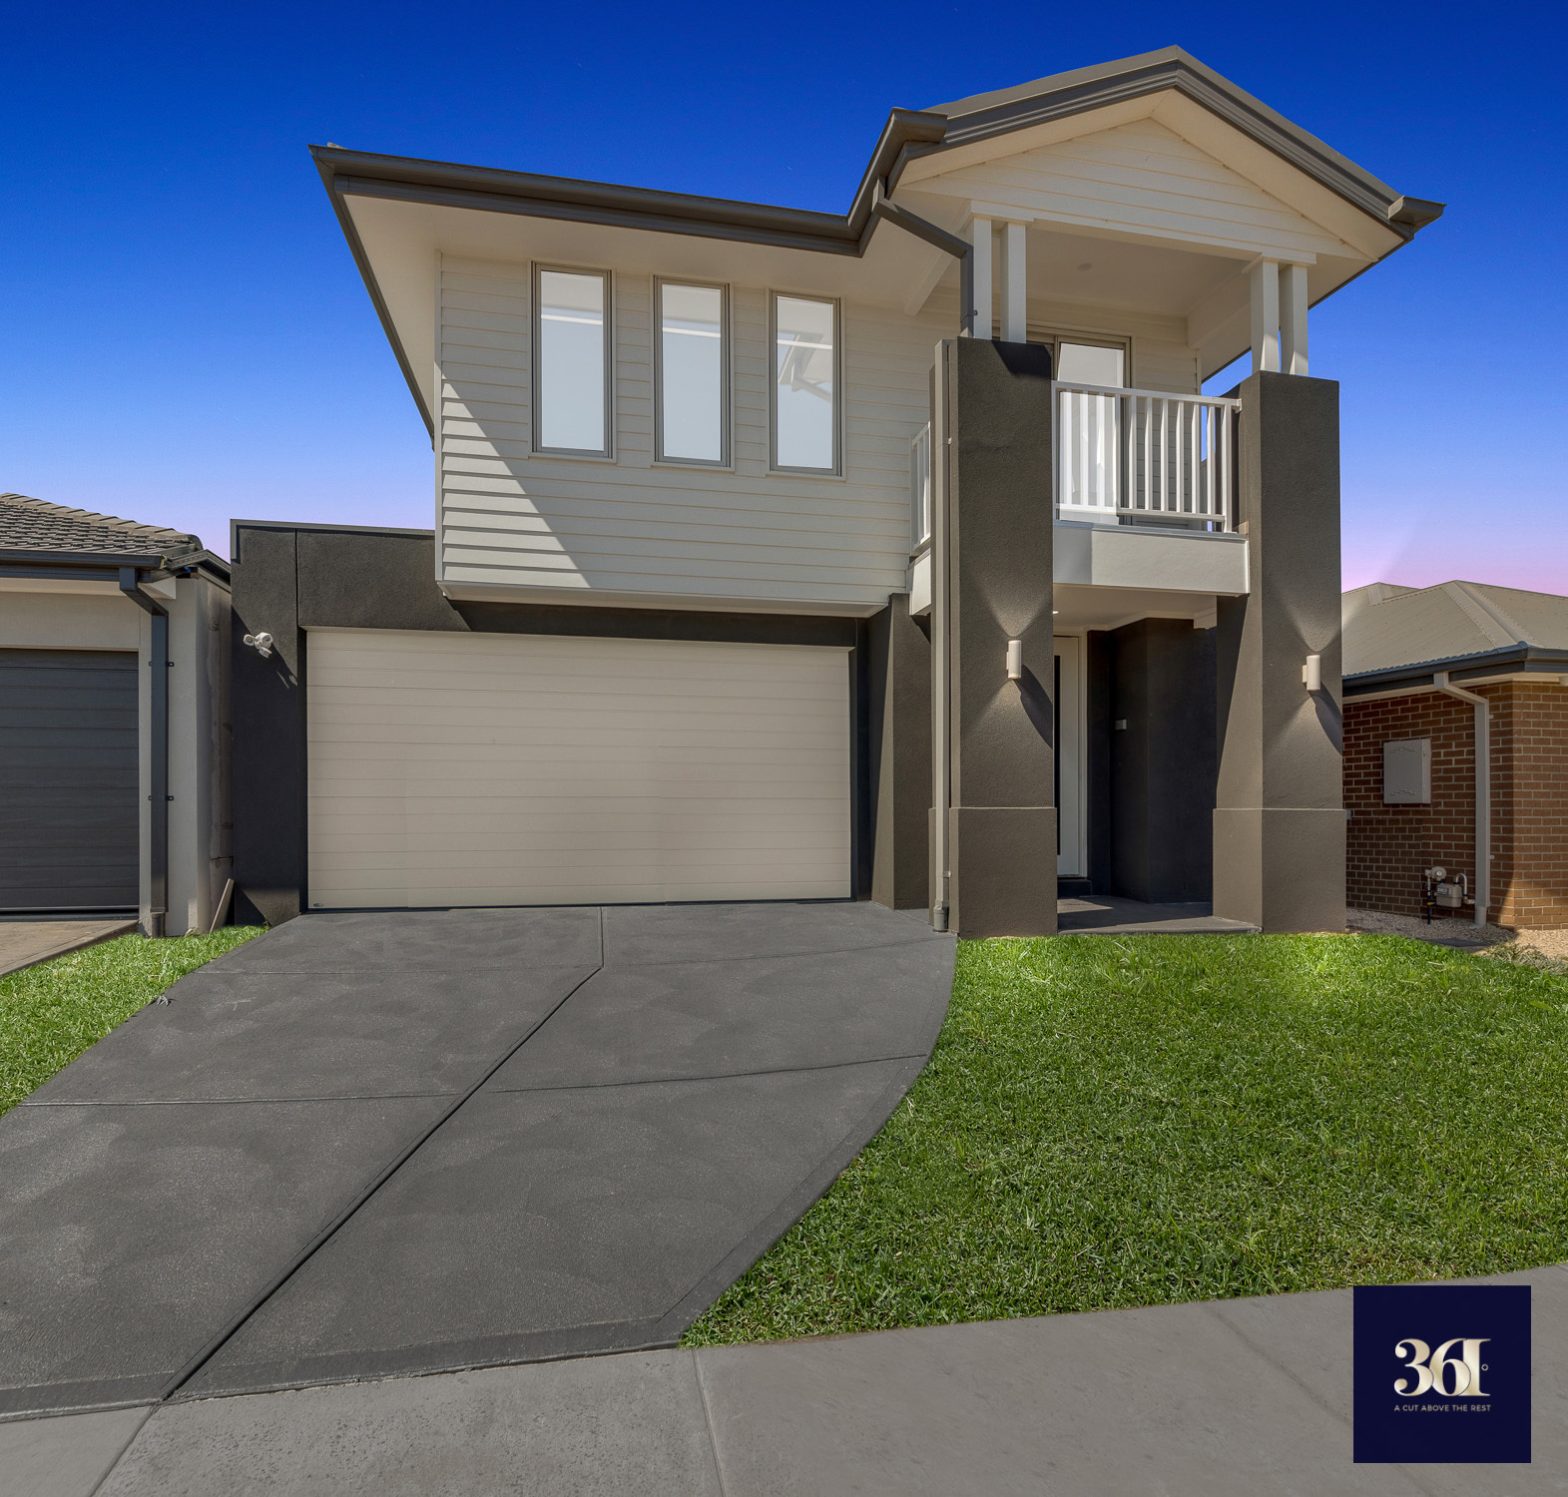 BRAND NEW DOUBLE STOREY SPACIOUS 4 BEDROOM HOME FOR RENT CLOSE BACCHUS MARSH GRAMMAR